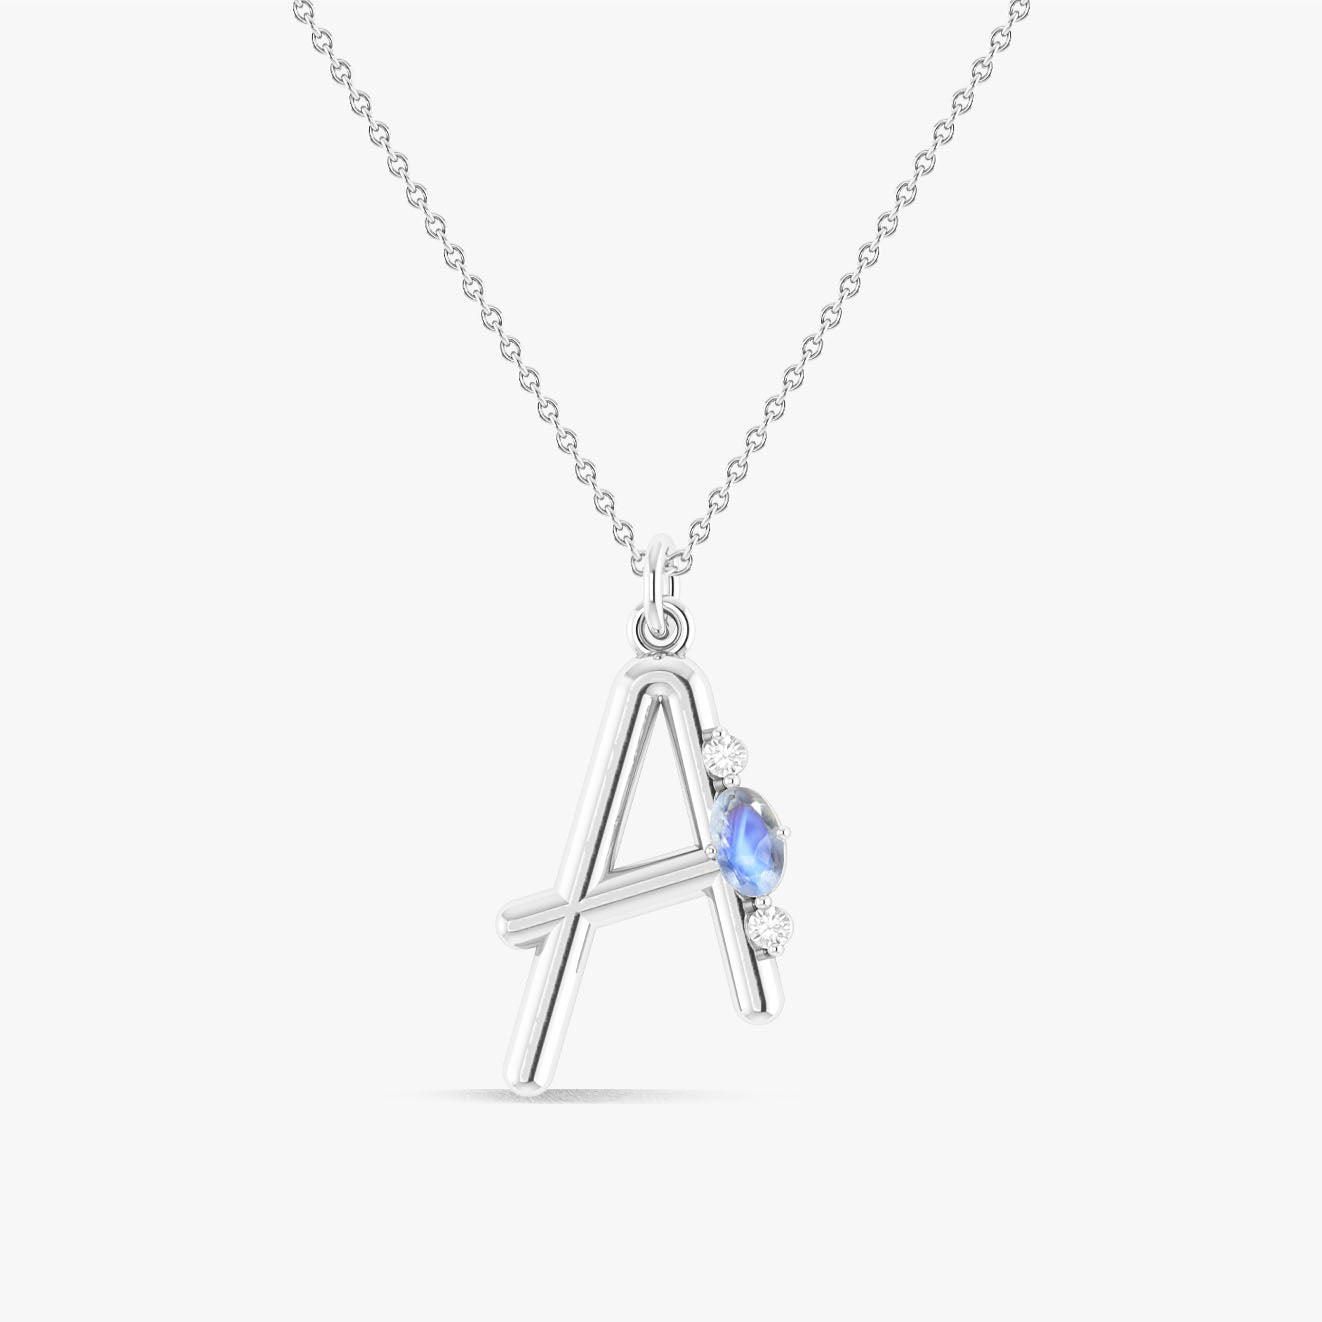 Capital "A" Rainbow Moonstone Initial Necklace